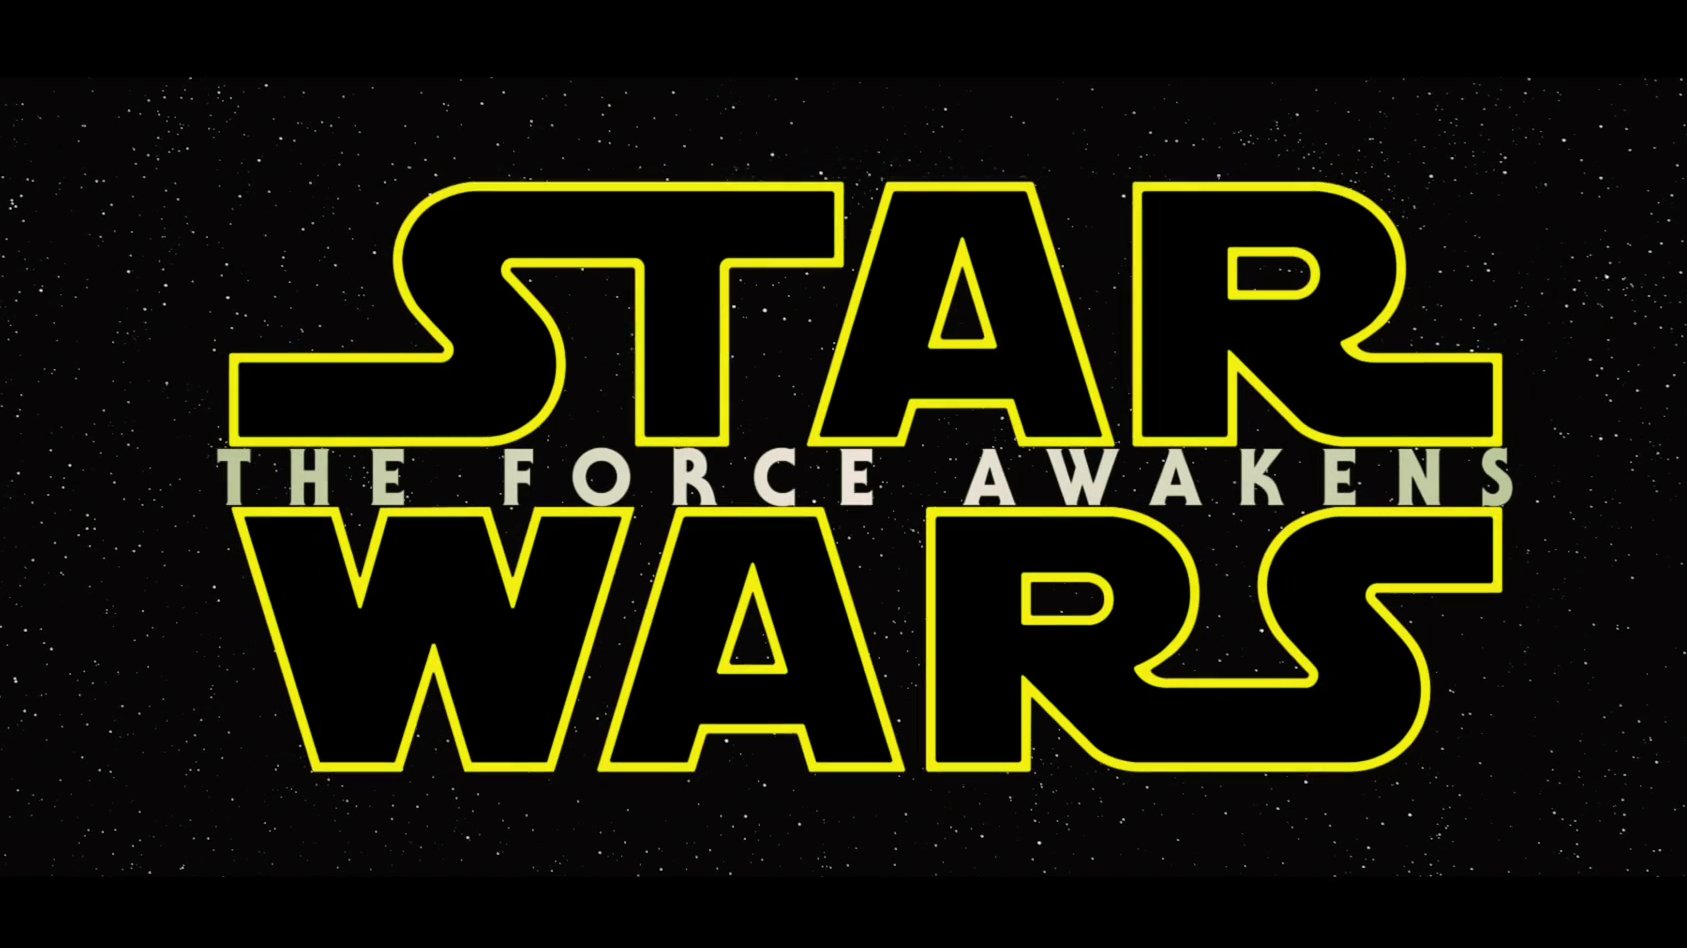 Star Wars: The Force Awakens Trailer (official), 2015.